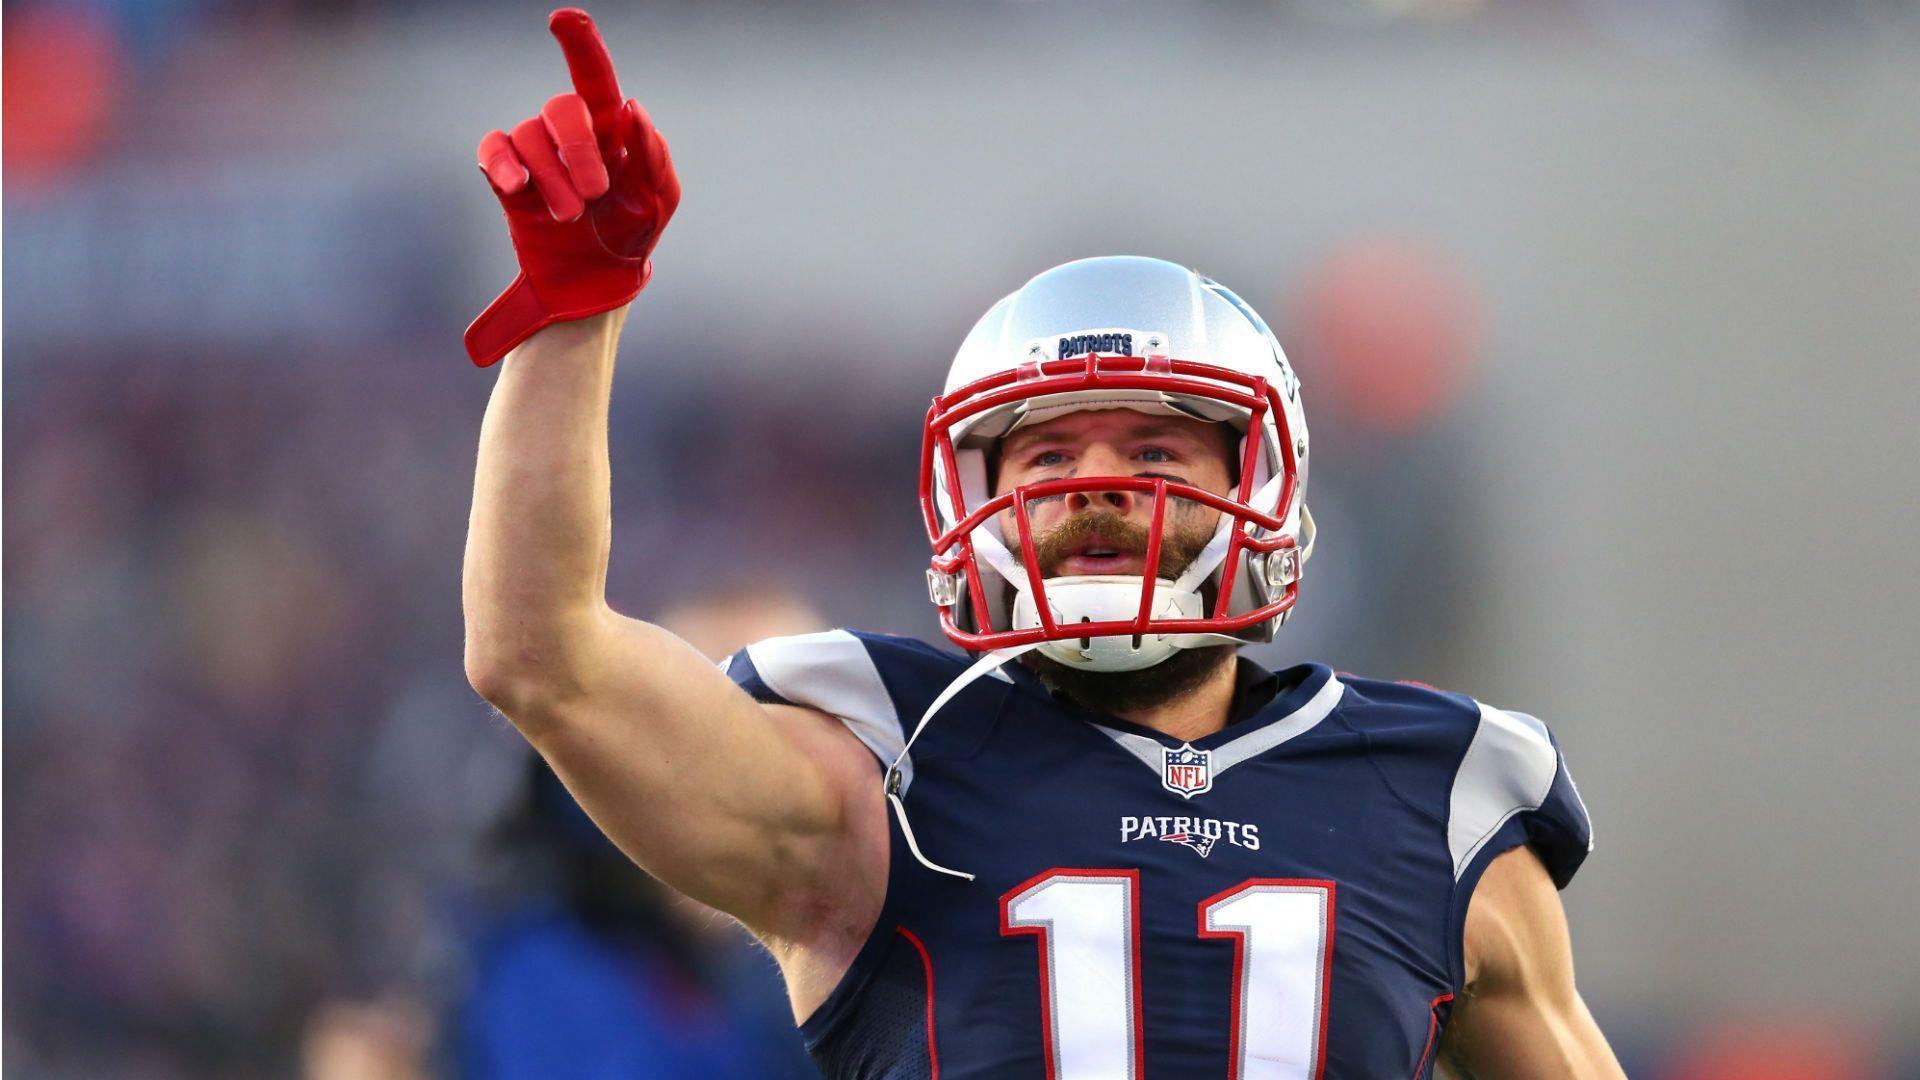 Back on the field, Patriots' Edelman changes everything. NFL